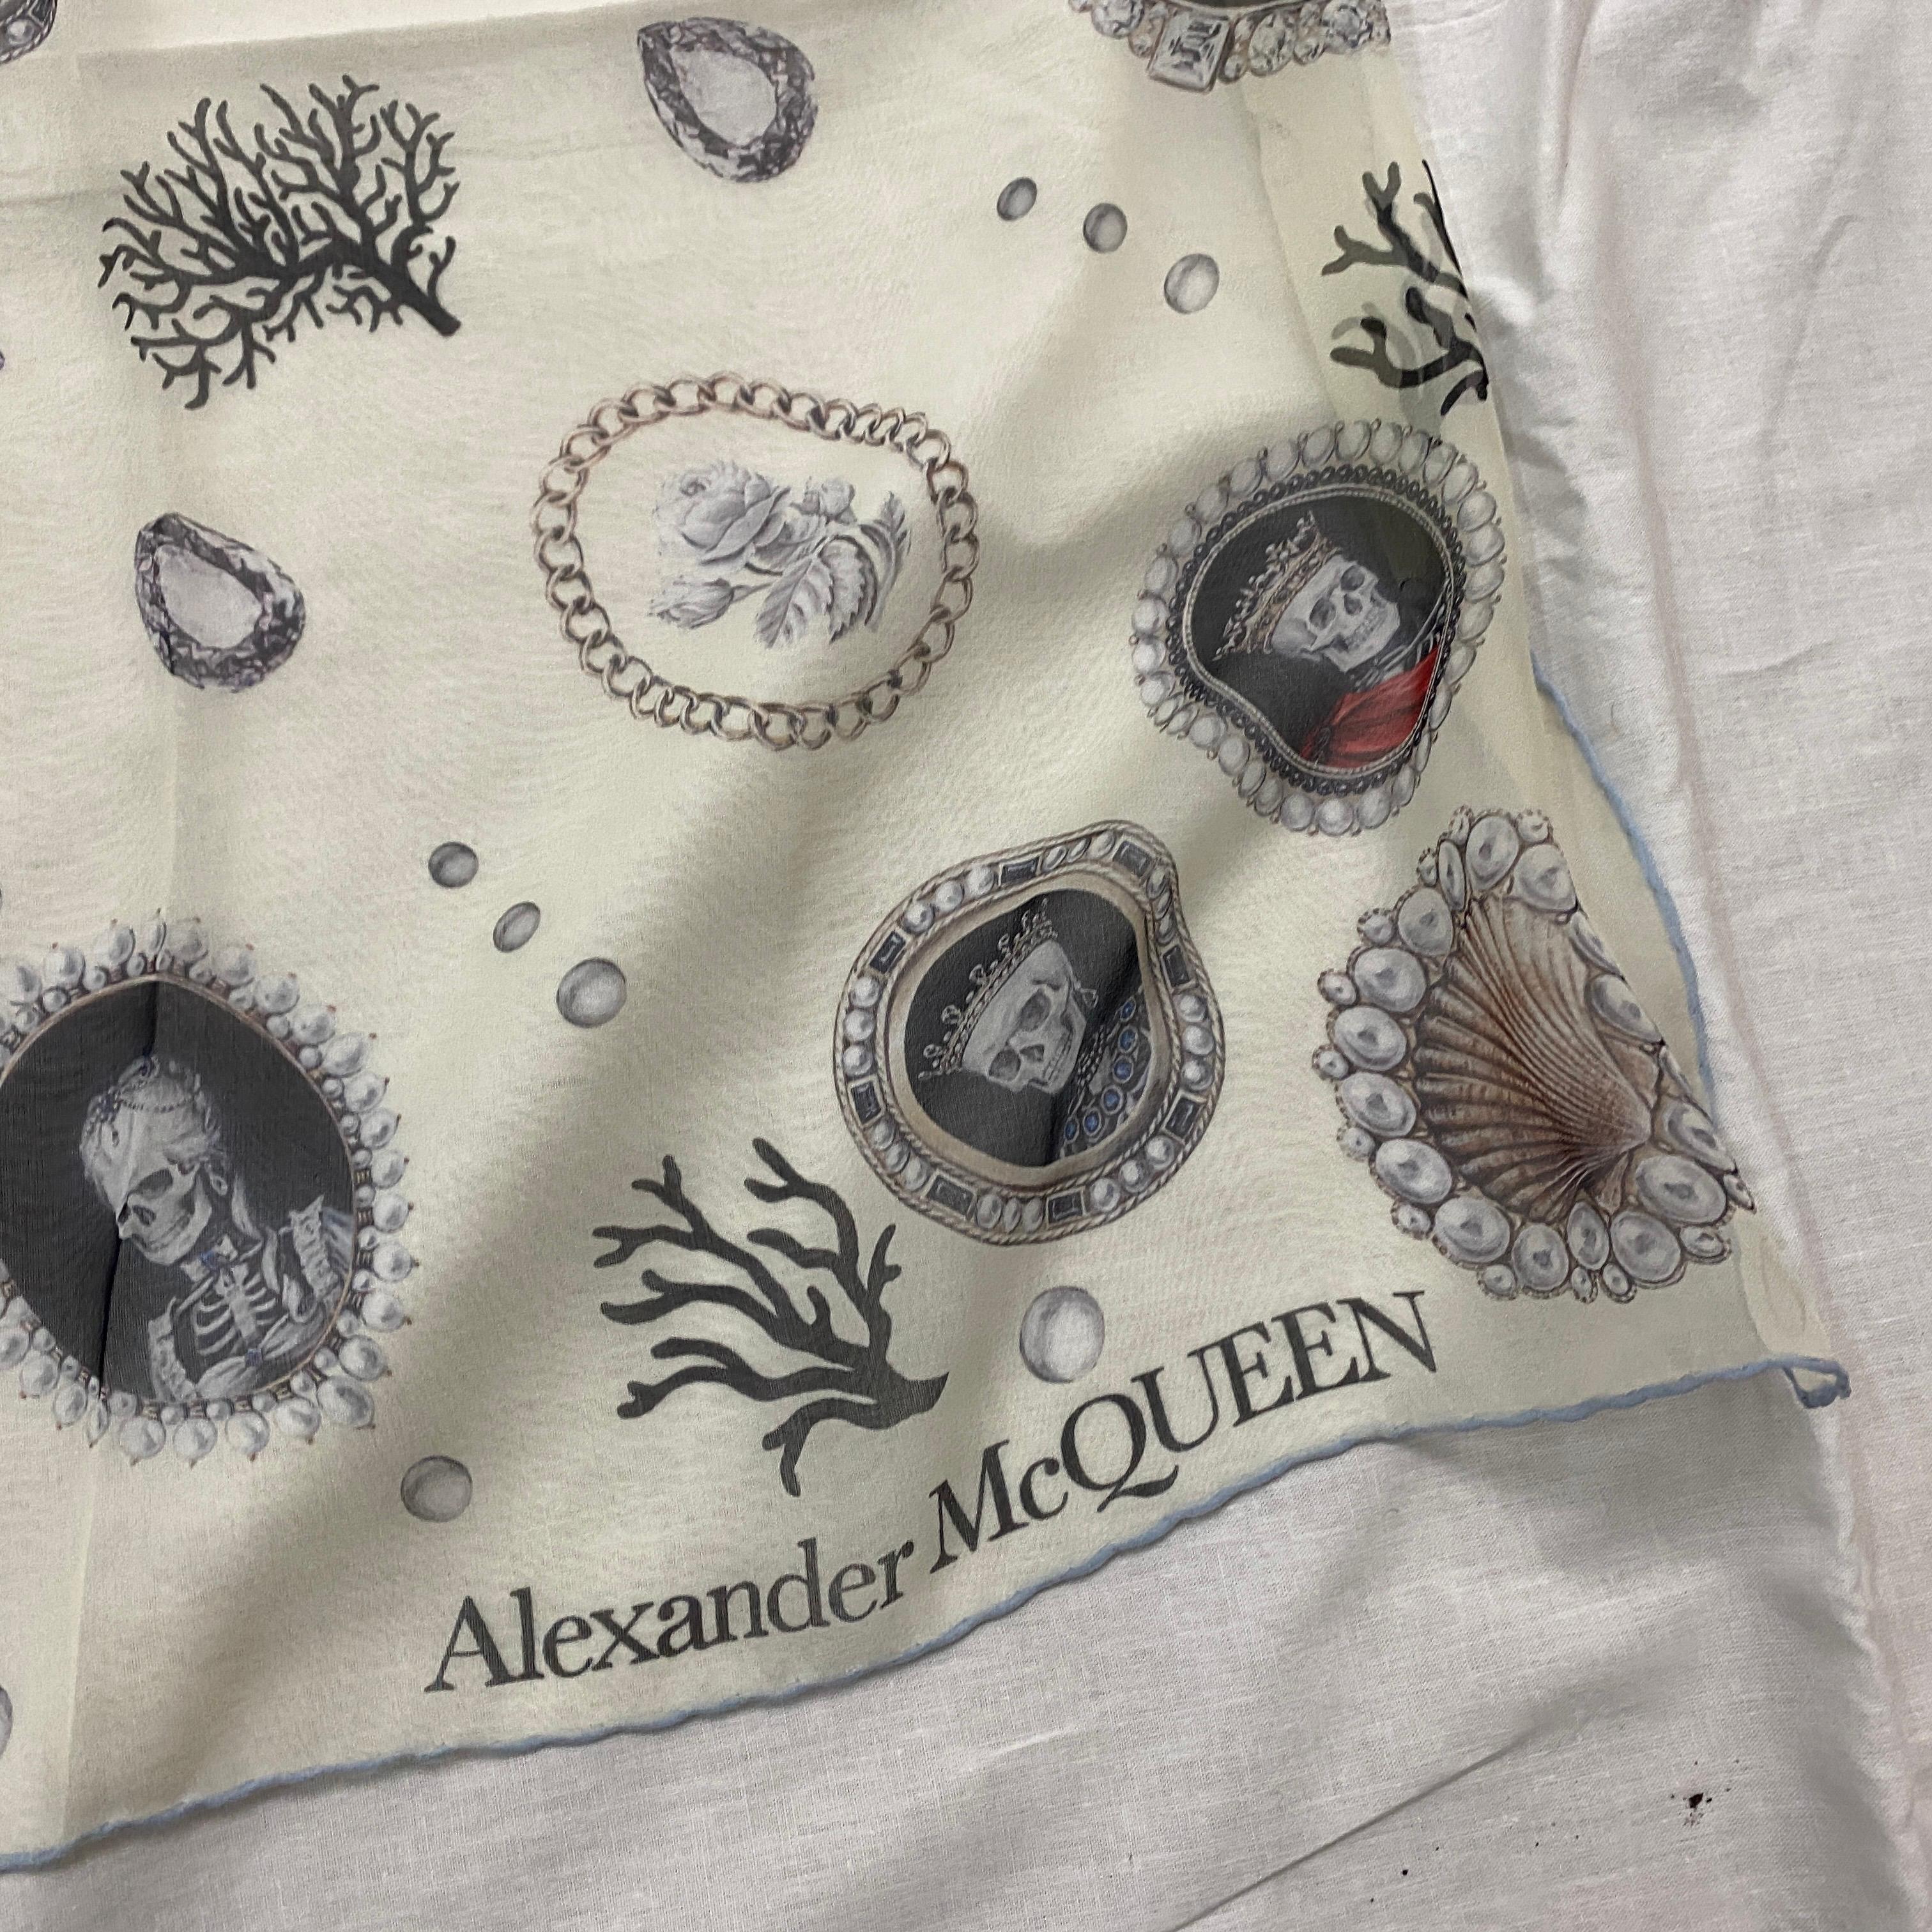 Iconic White Silk Scarf by Alexander McQueen, with central Skull and other shell and coral designs. Dimensions 135 x 135 cm.